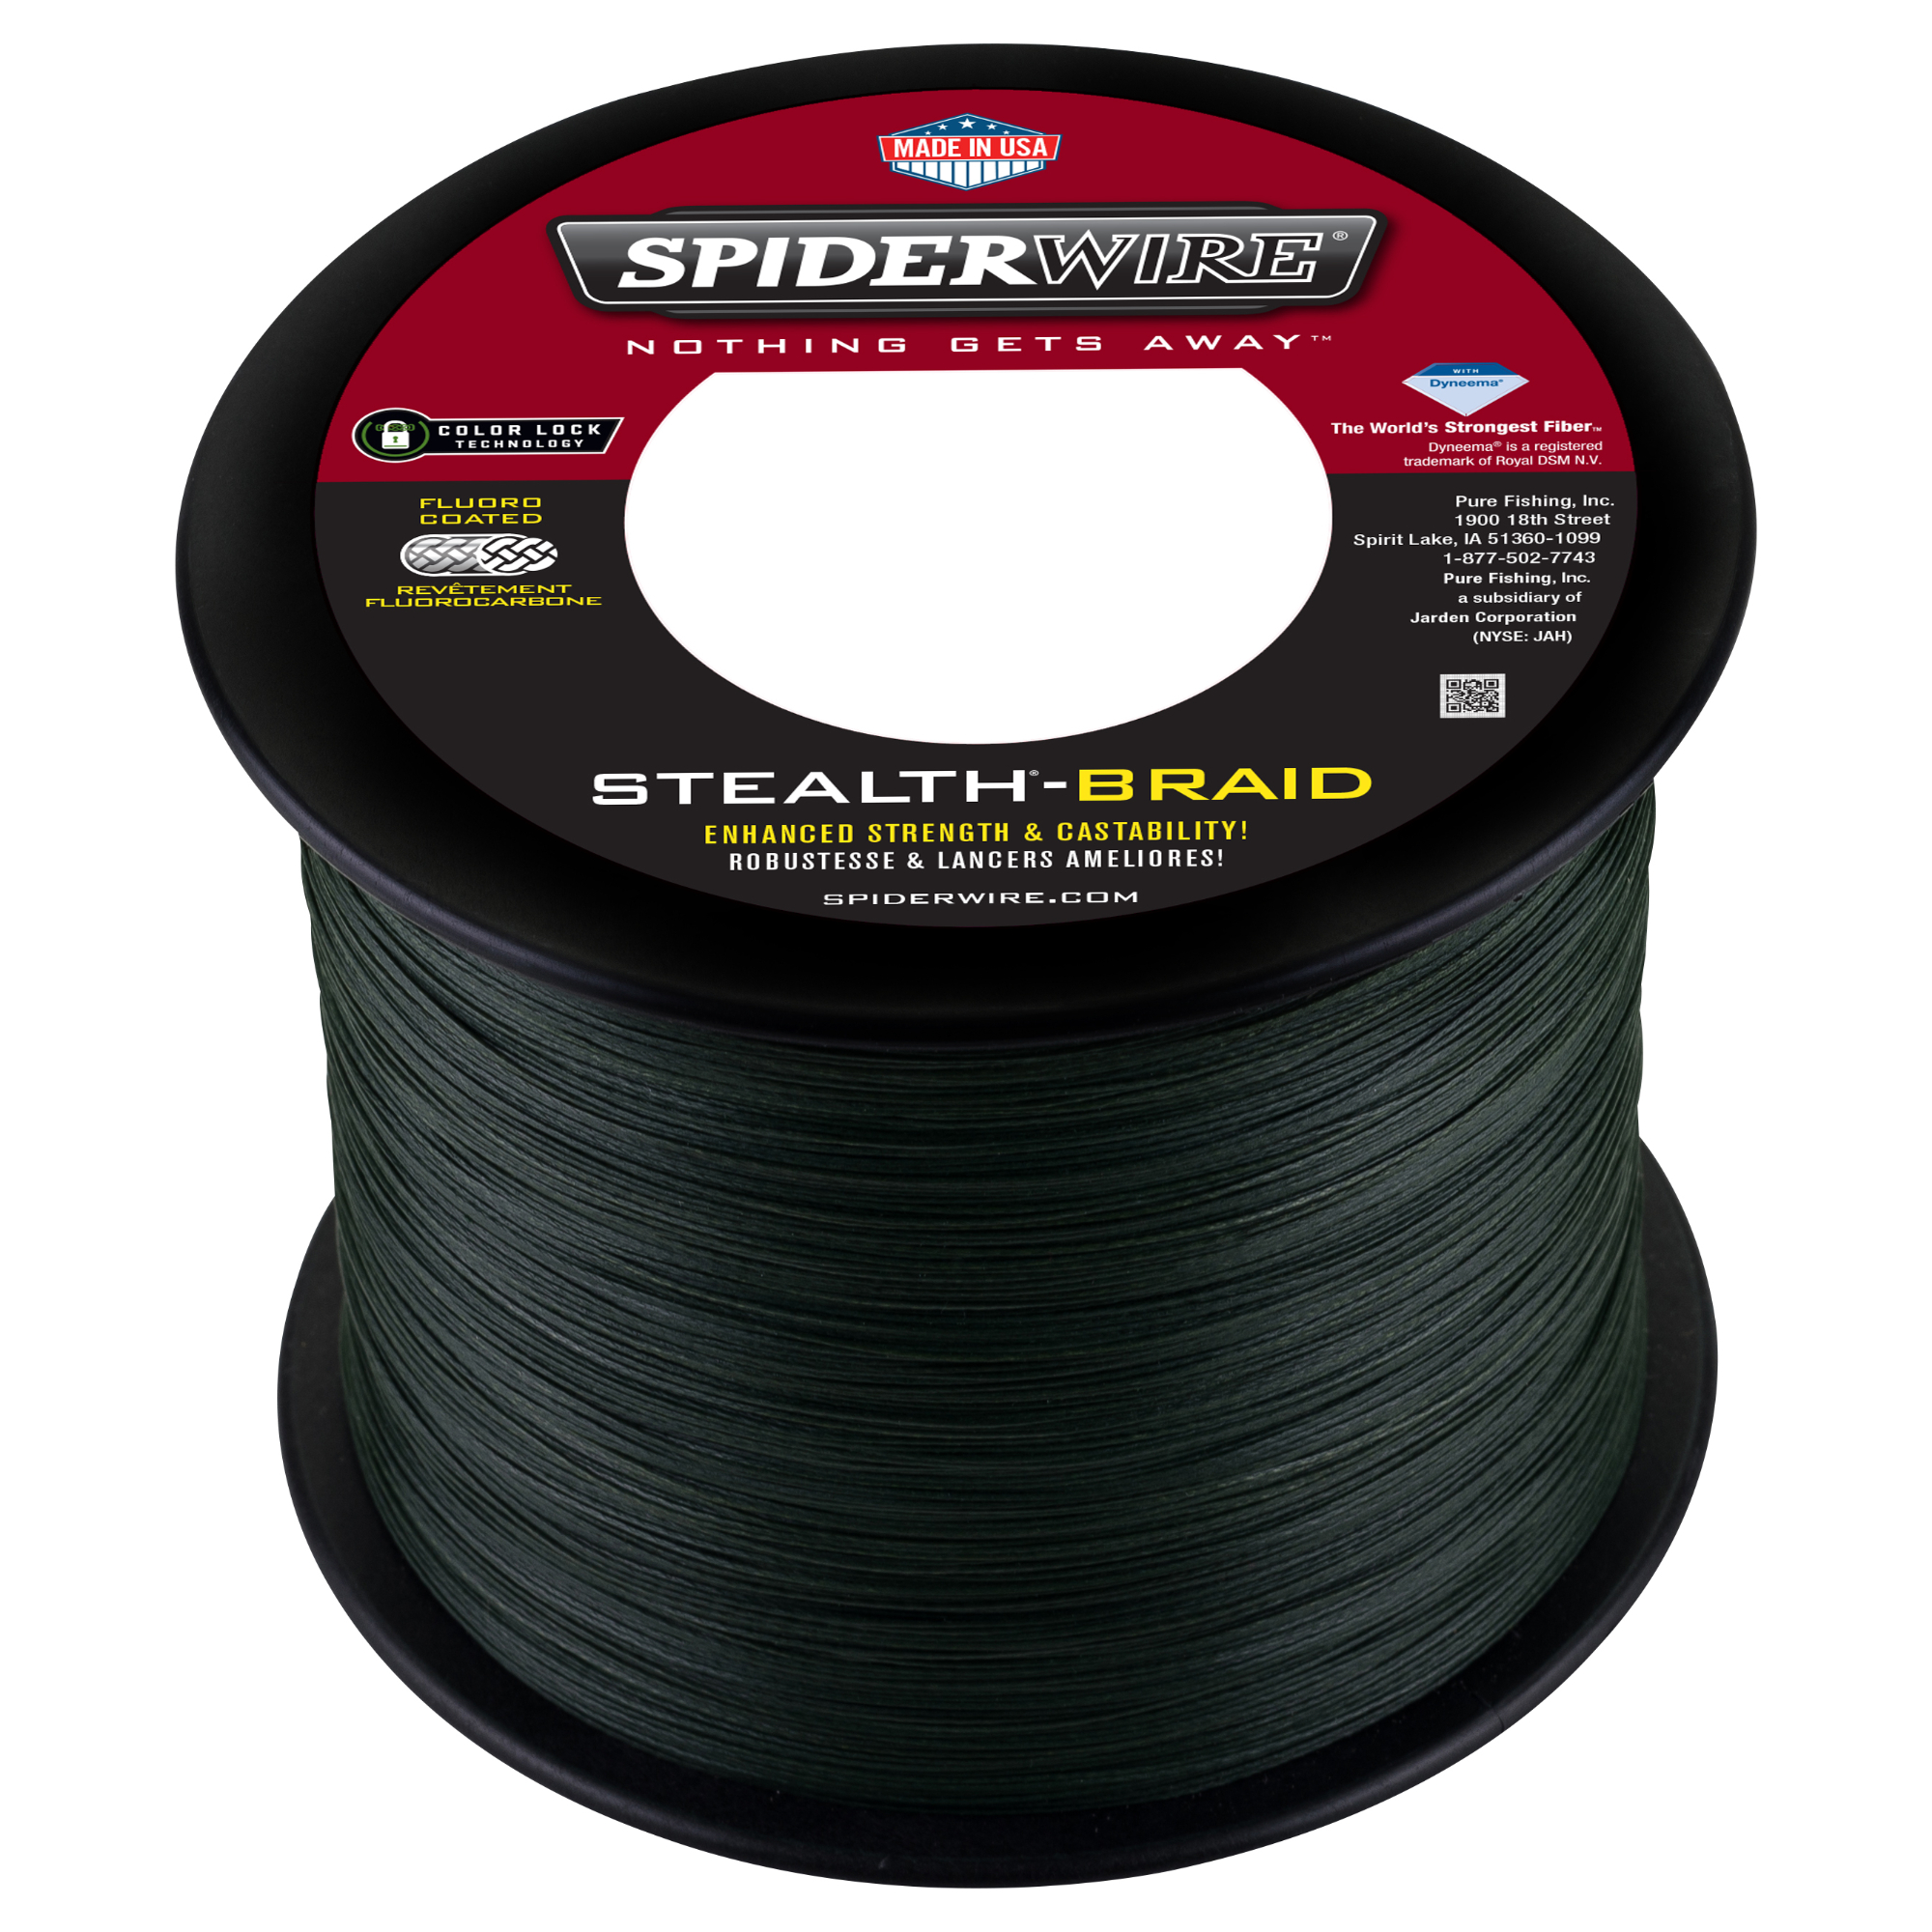 https://www.precisionfishing.com/img/products/032/032%20Spiderwire%20Stealth%20Fishing%20Line%201500%20Yds%20-%20Moss%20Green.jpg